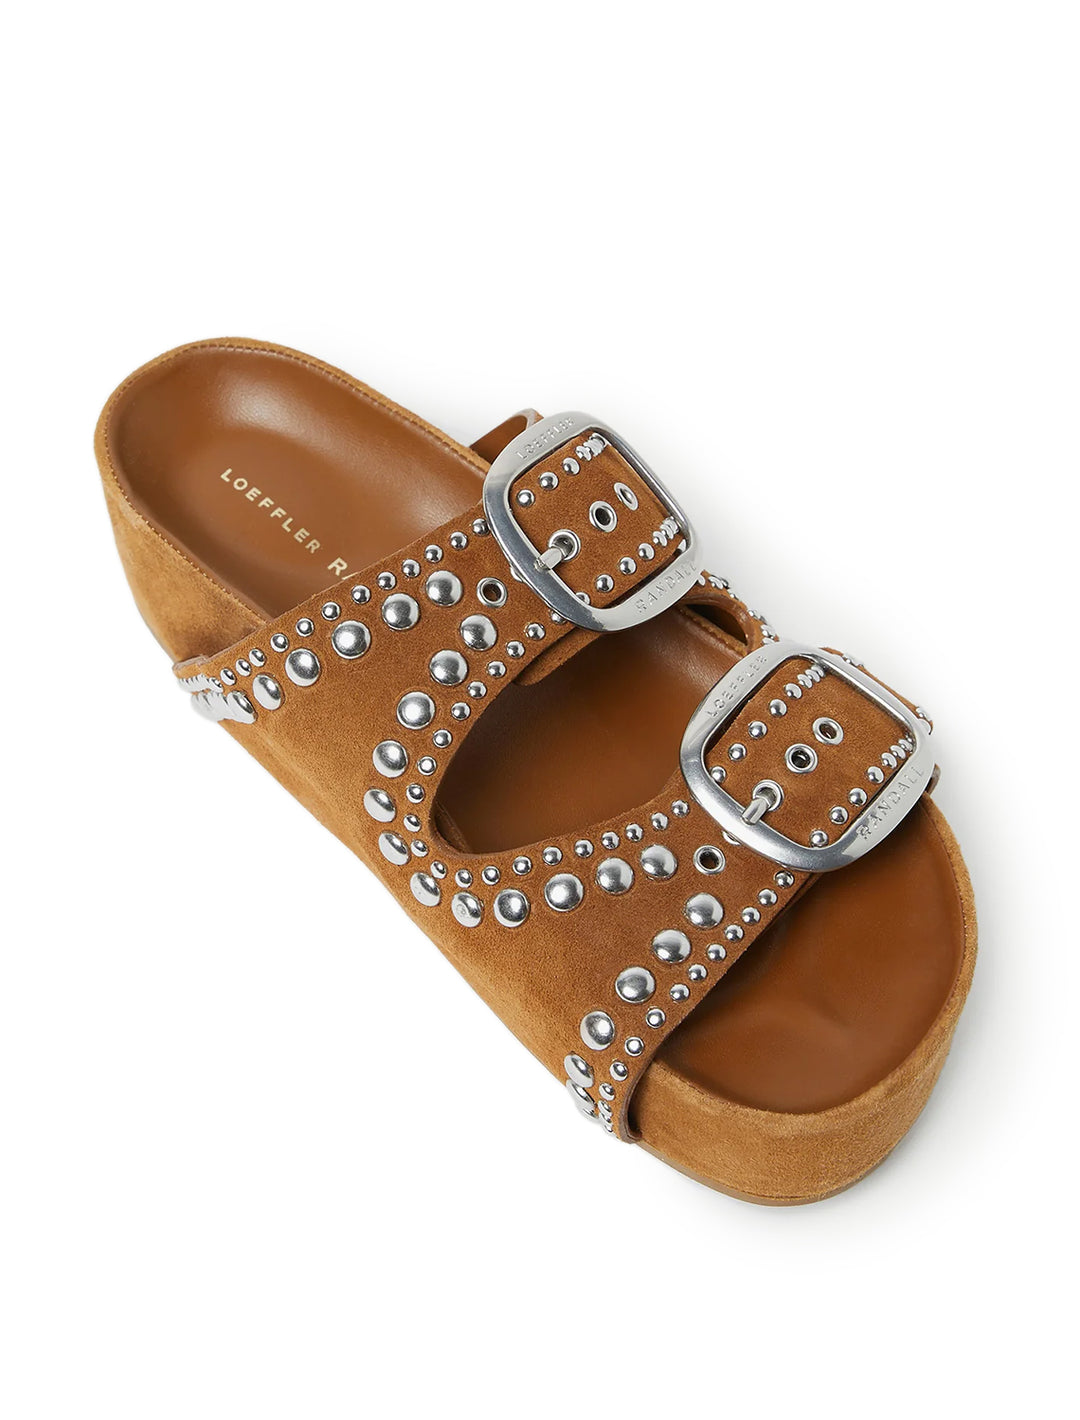 Overhead view of Loeffler Randall's jack two band sandal with studs.